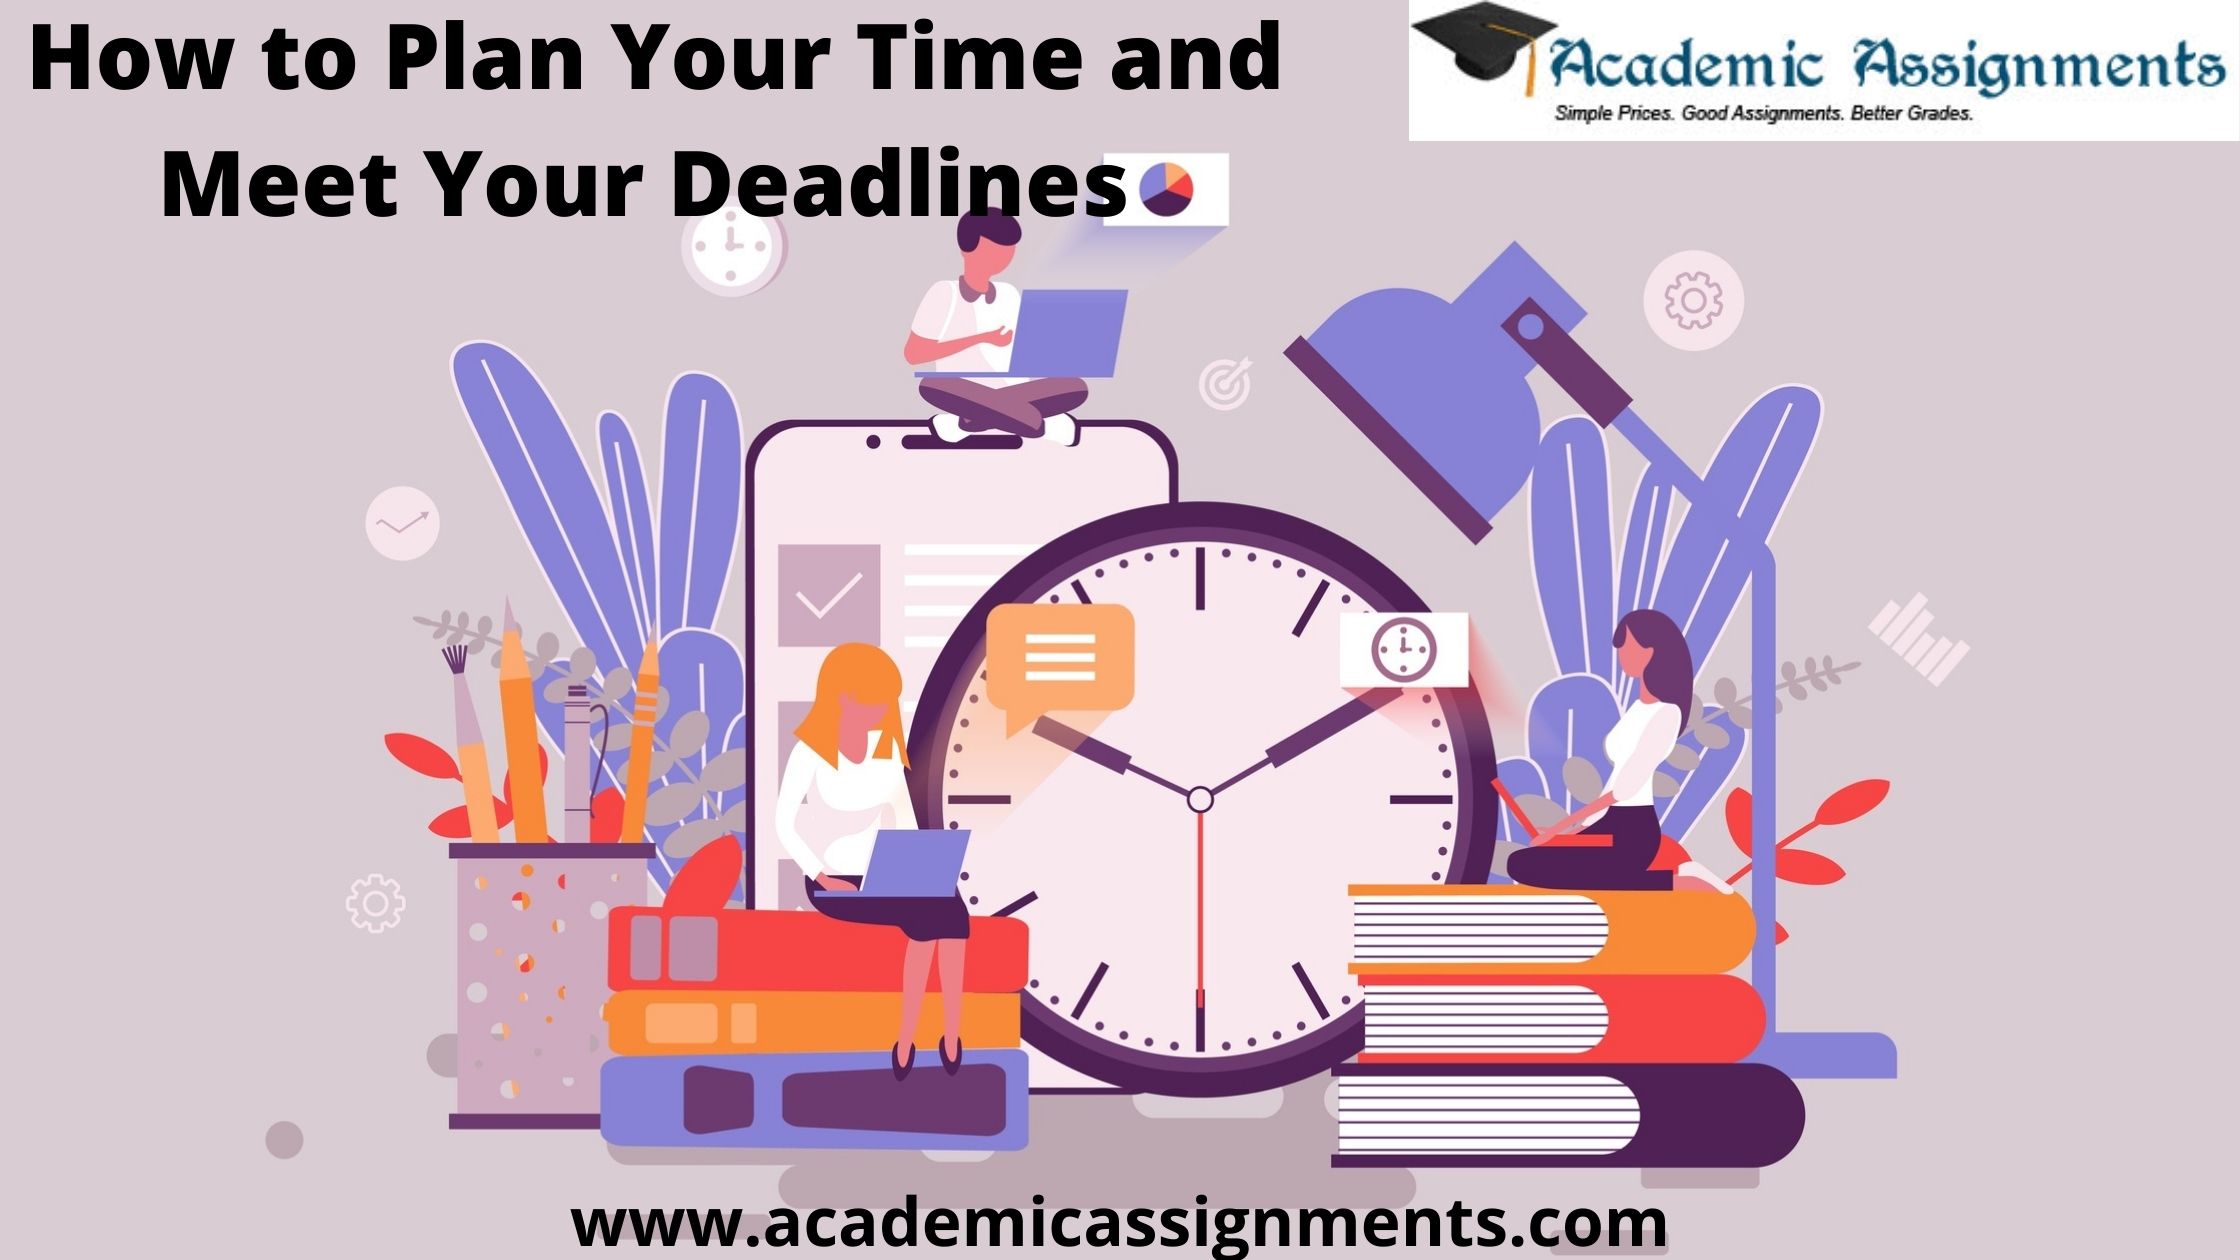 How to Plan Your Time and Meet Your Deadlines